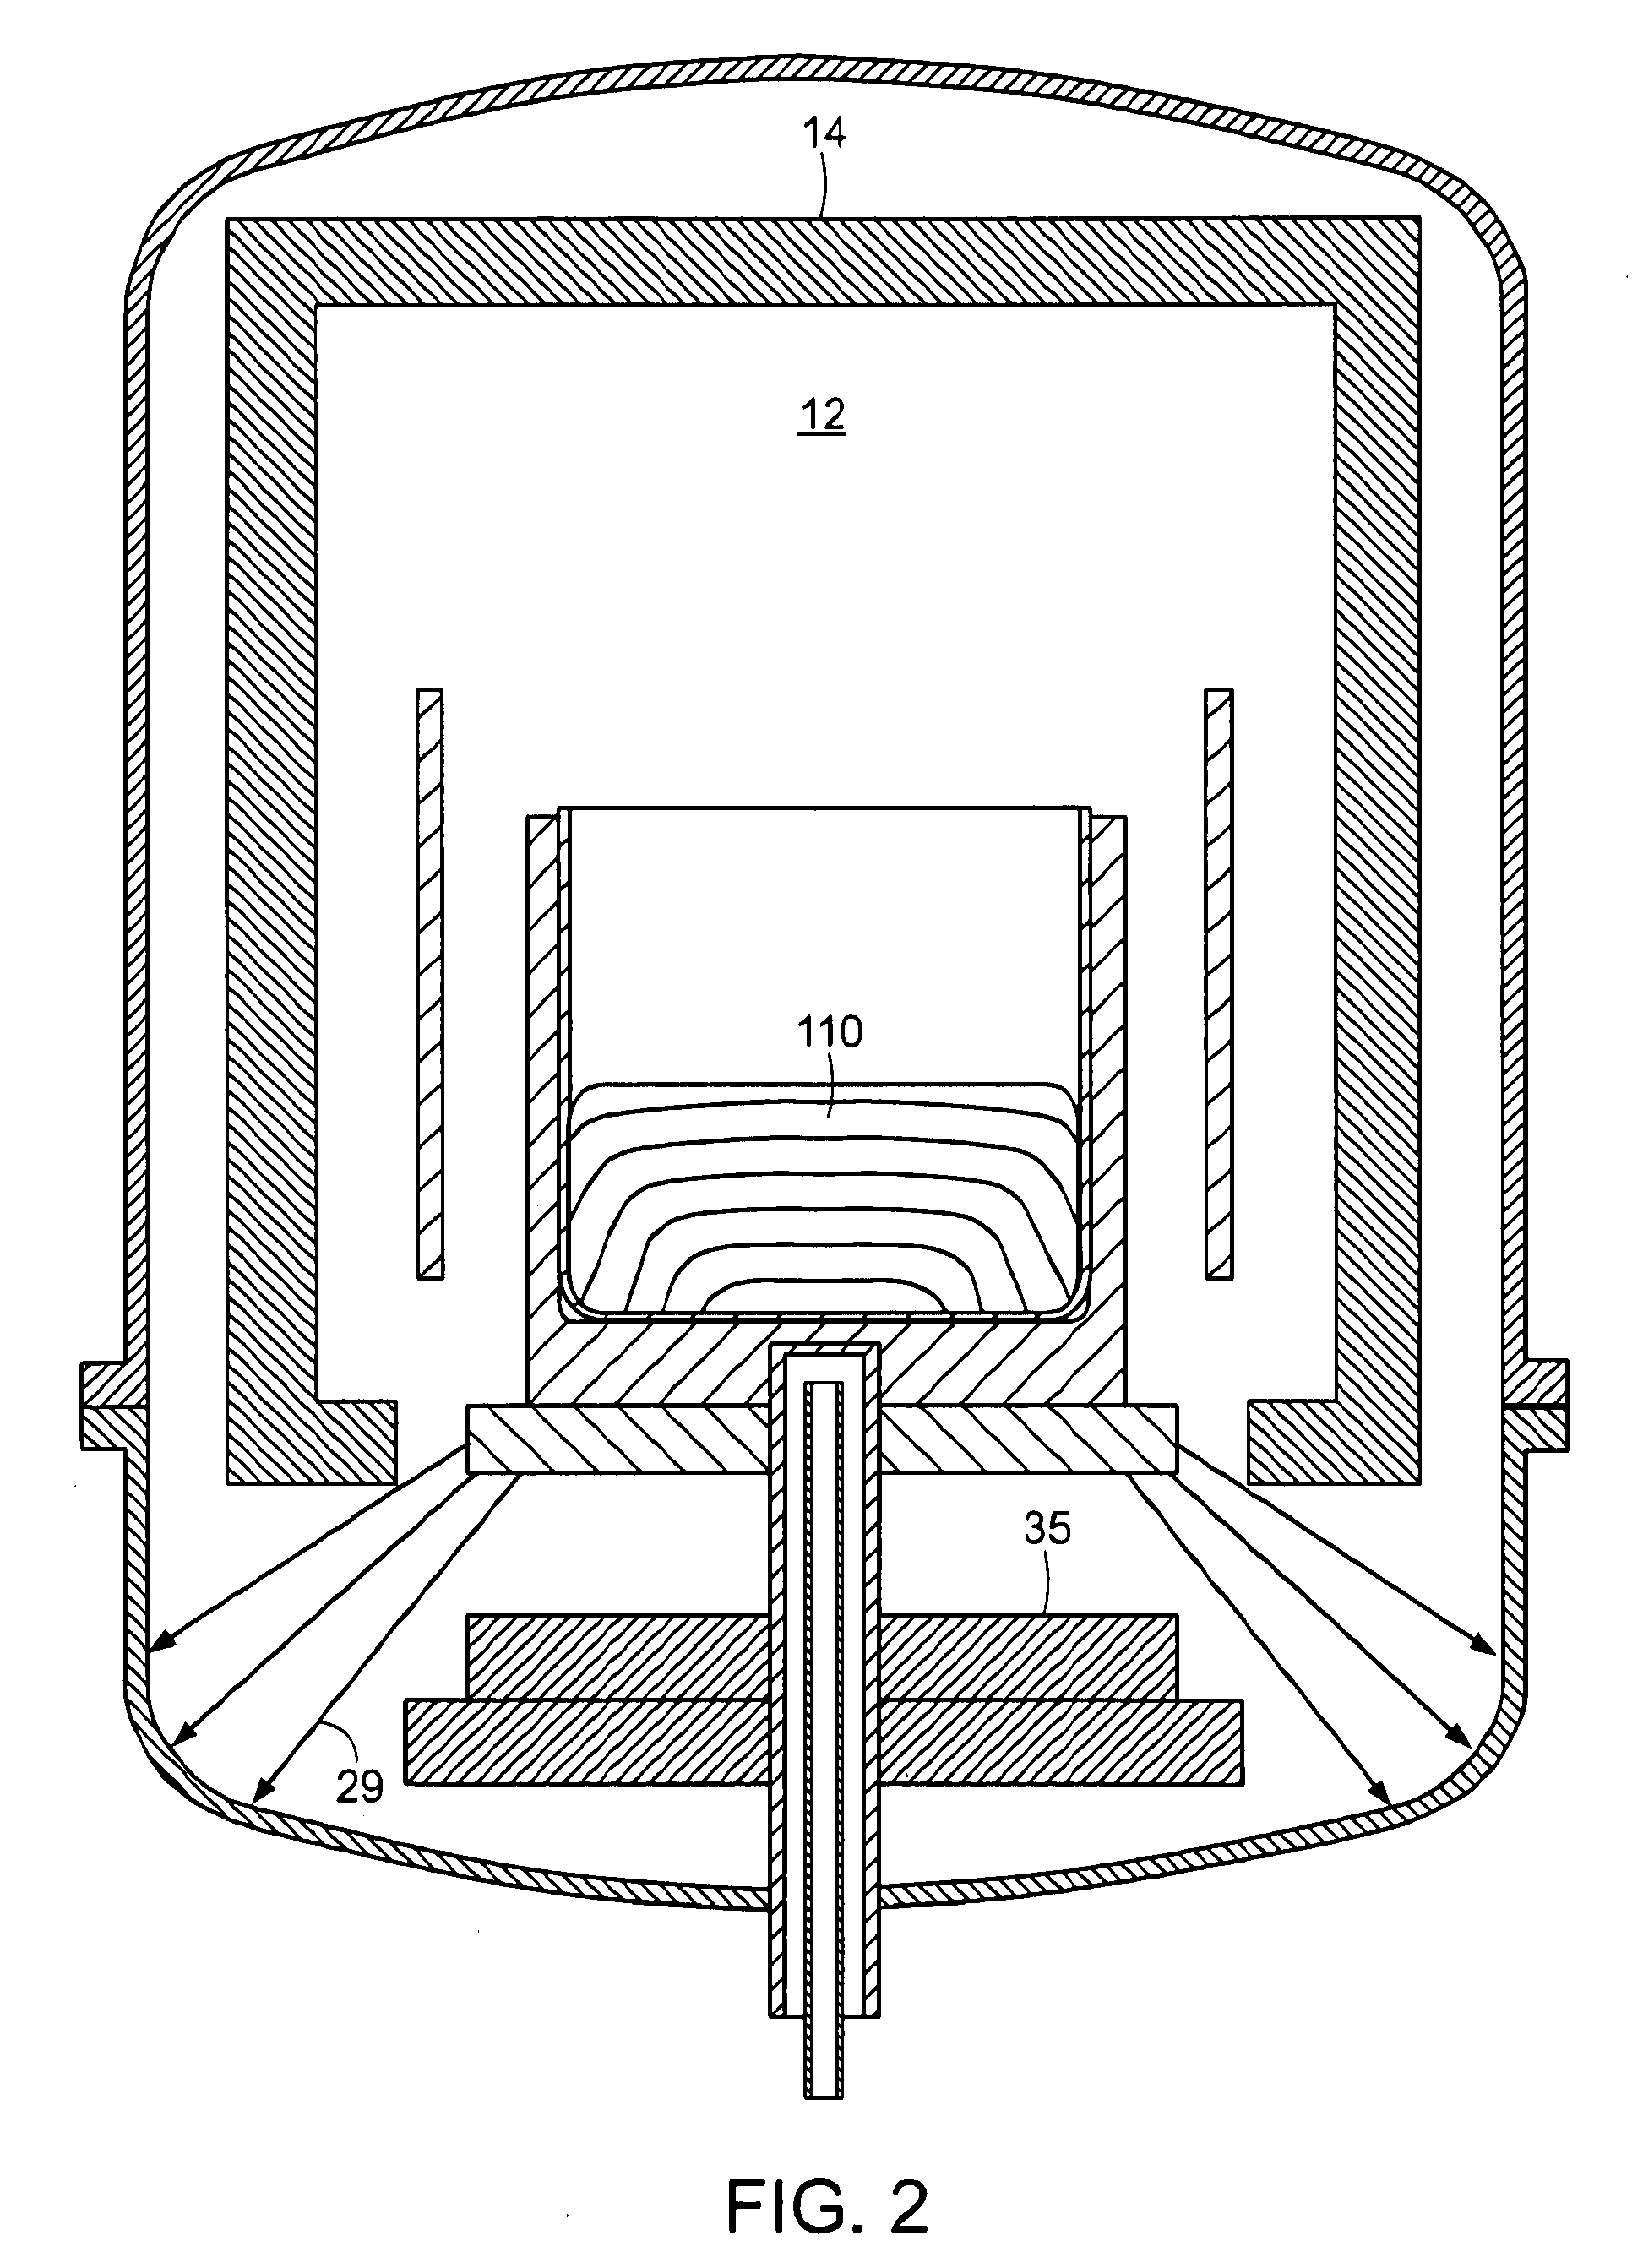 Systems and methods for growing monocrystalline silicon ingots by directional solidification